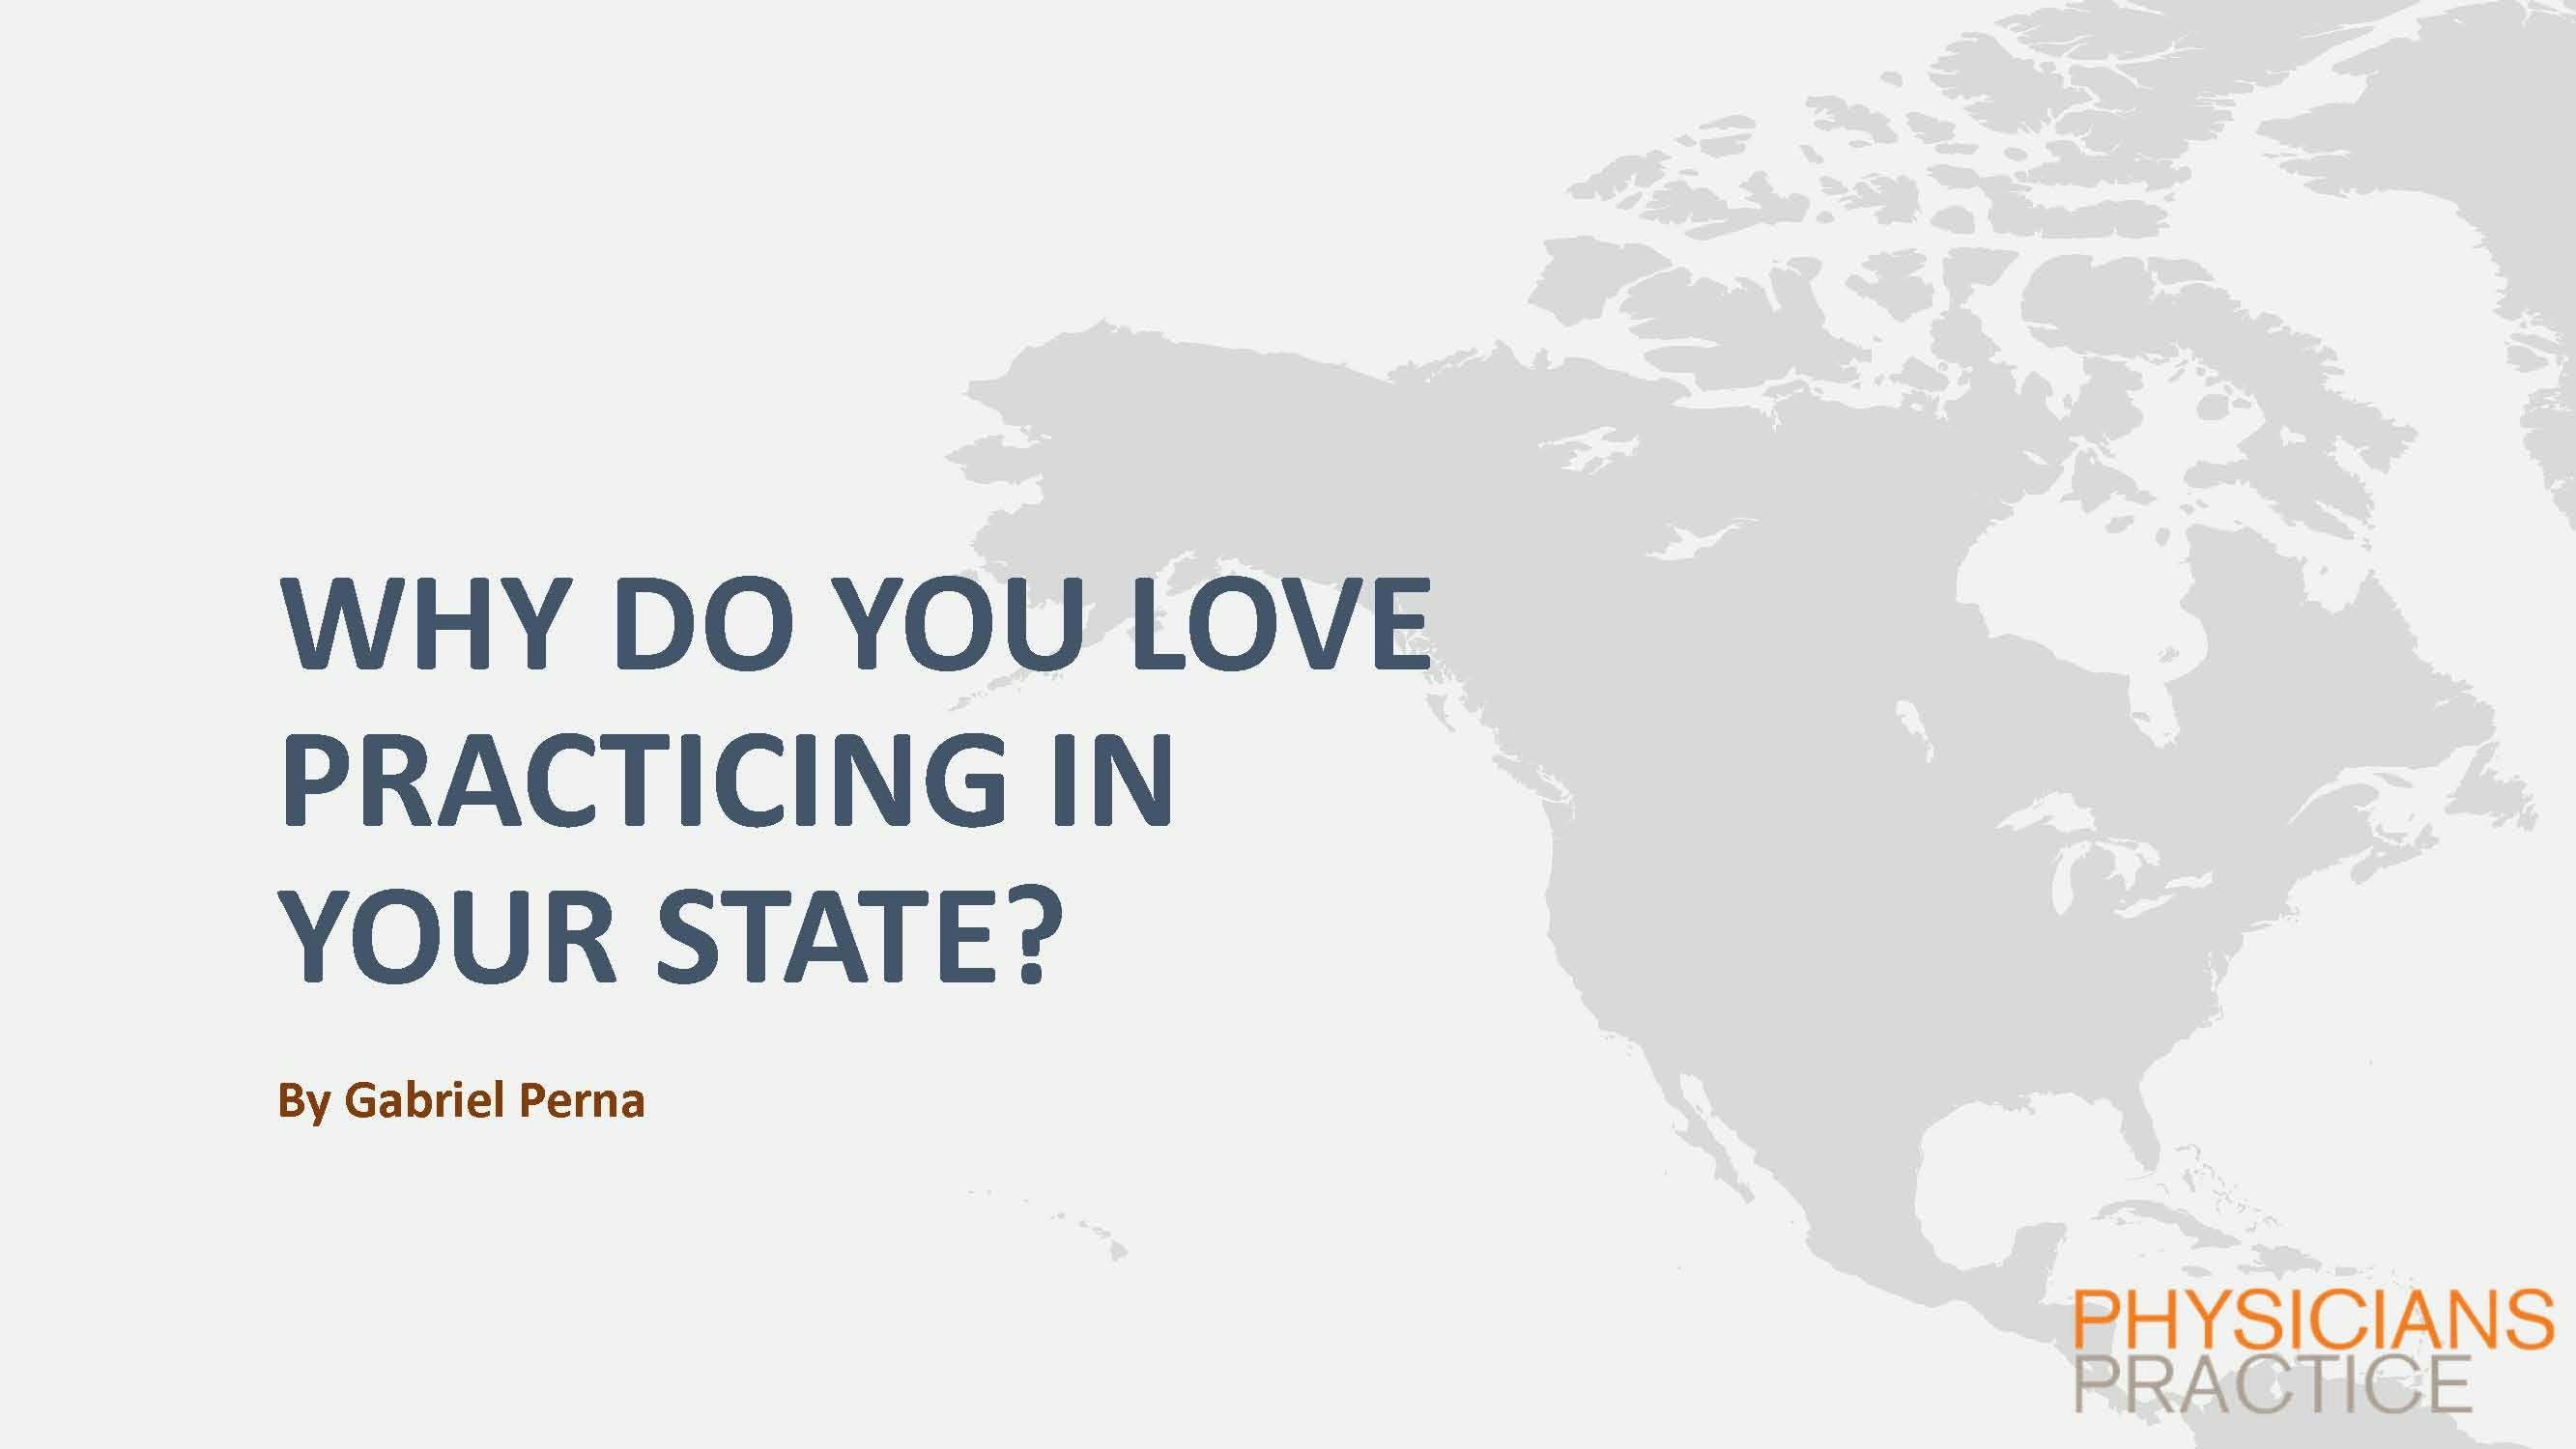 Why Do You Love Practicing in Your State?